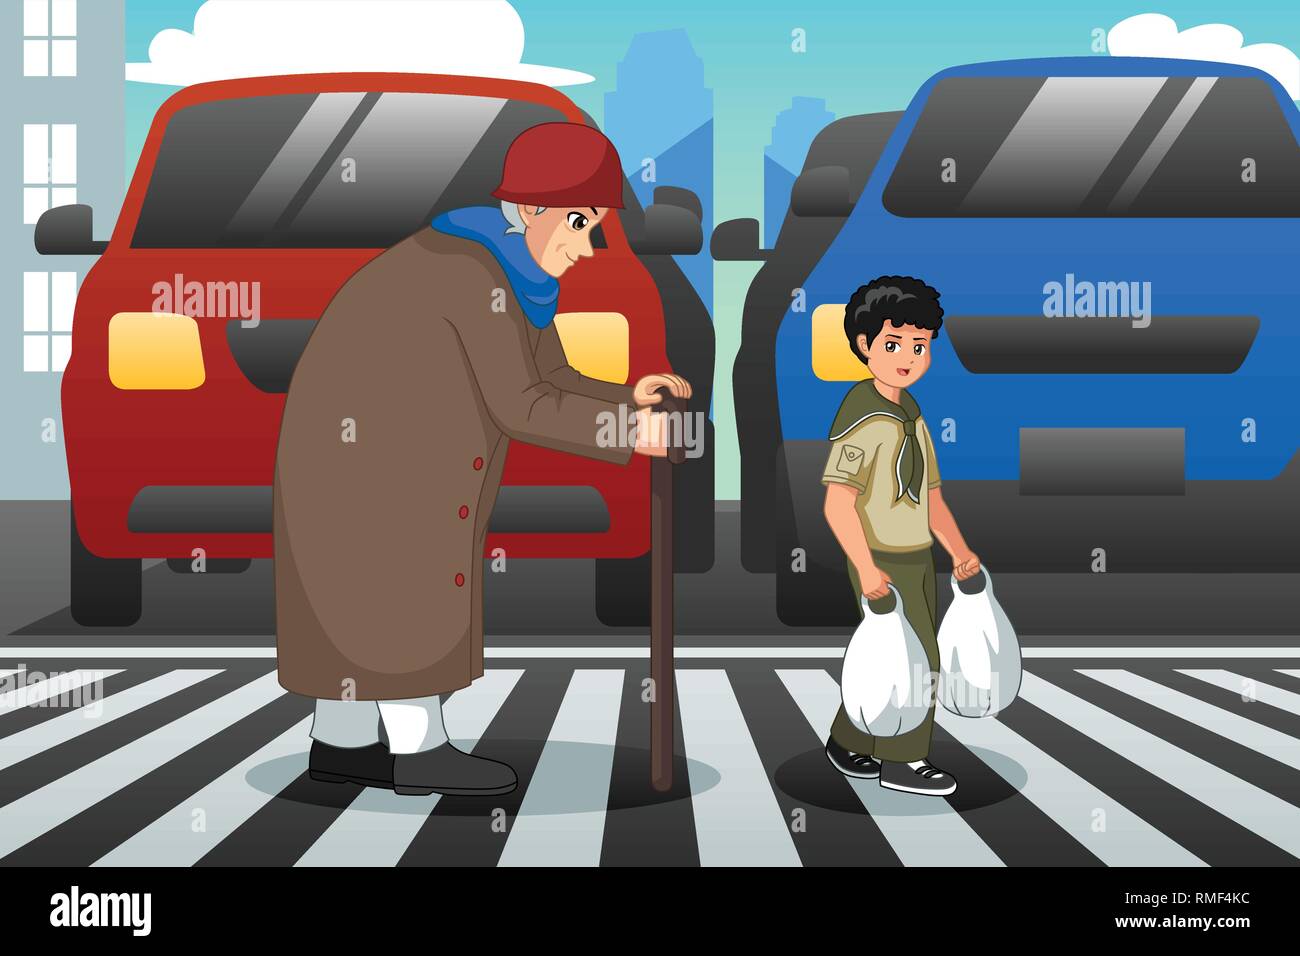 A vector illustration of Boy Helping Old Lady Crossing Street Stock Vector